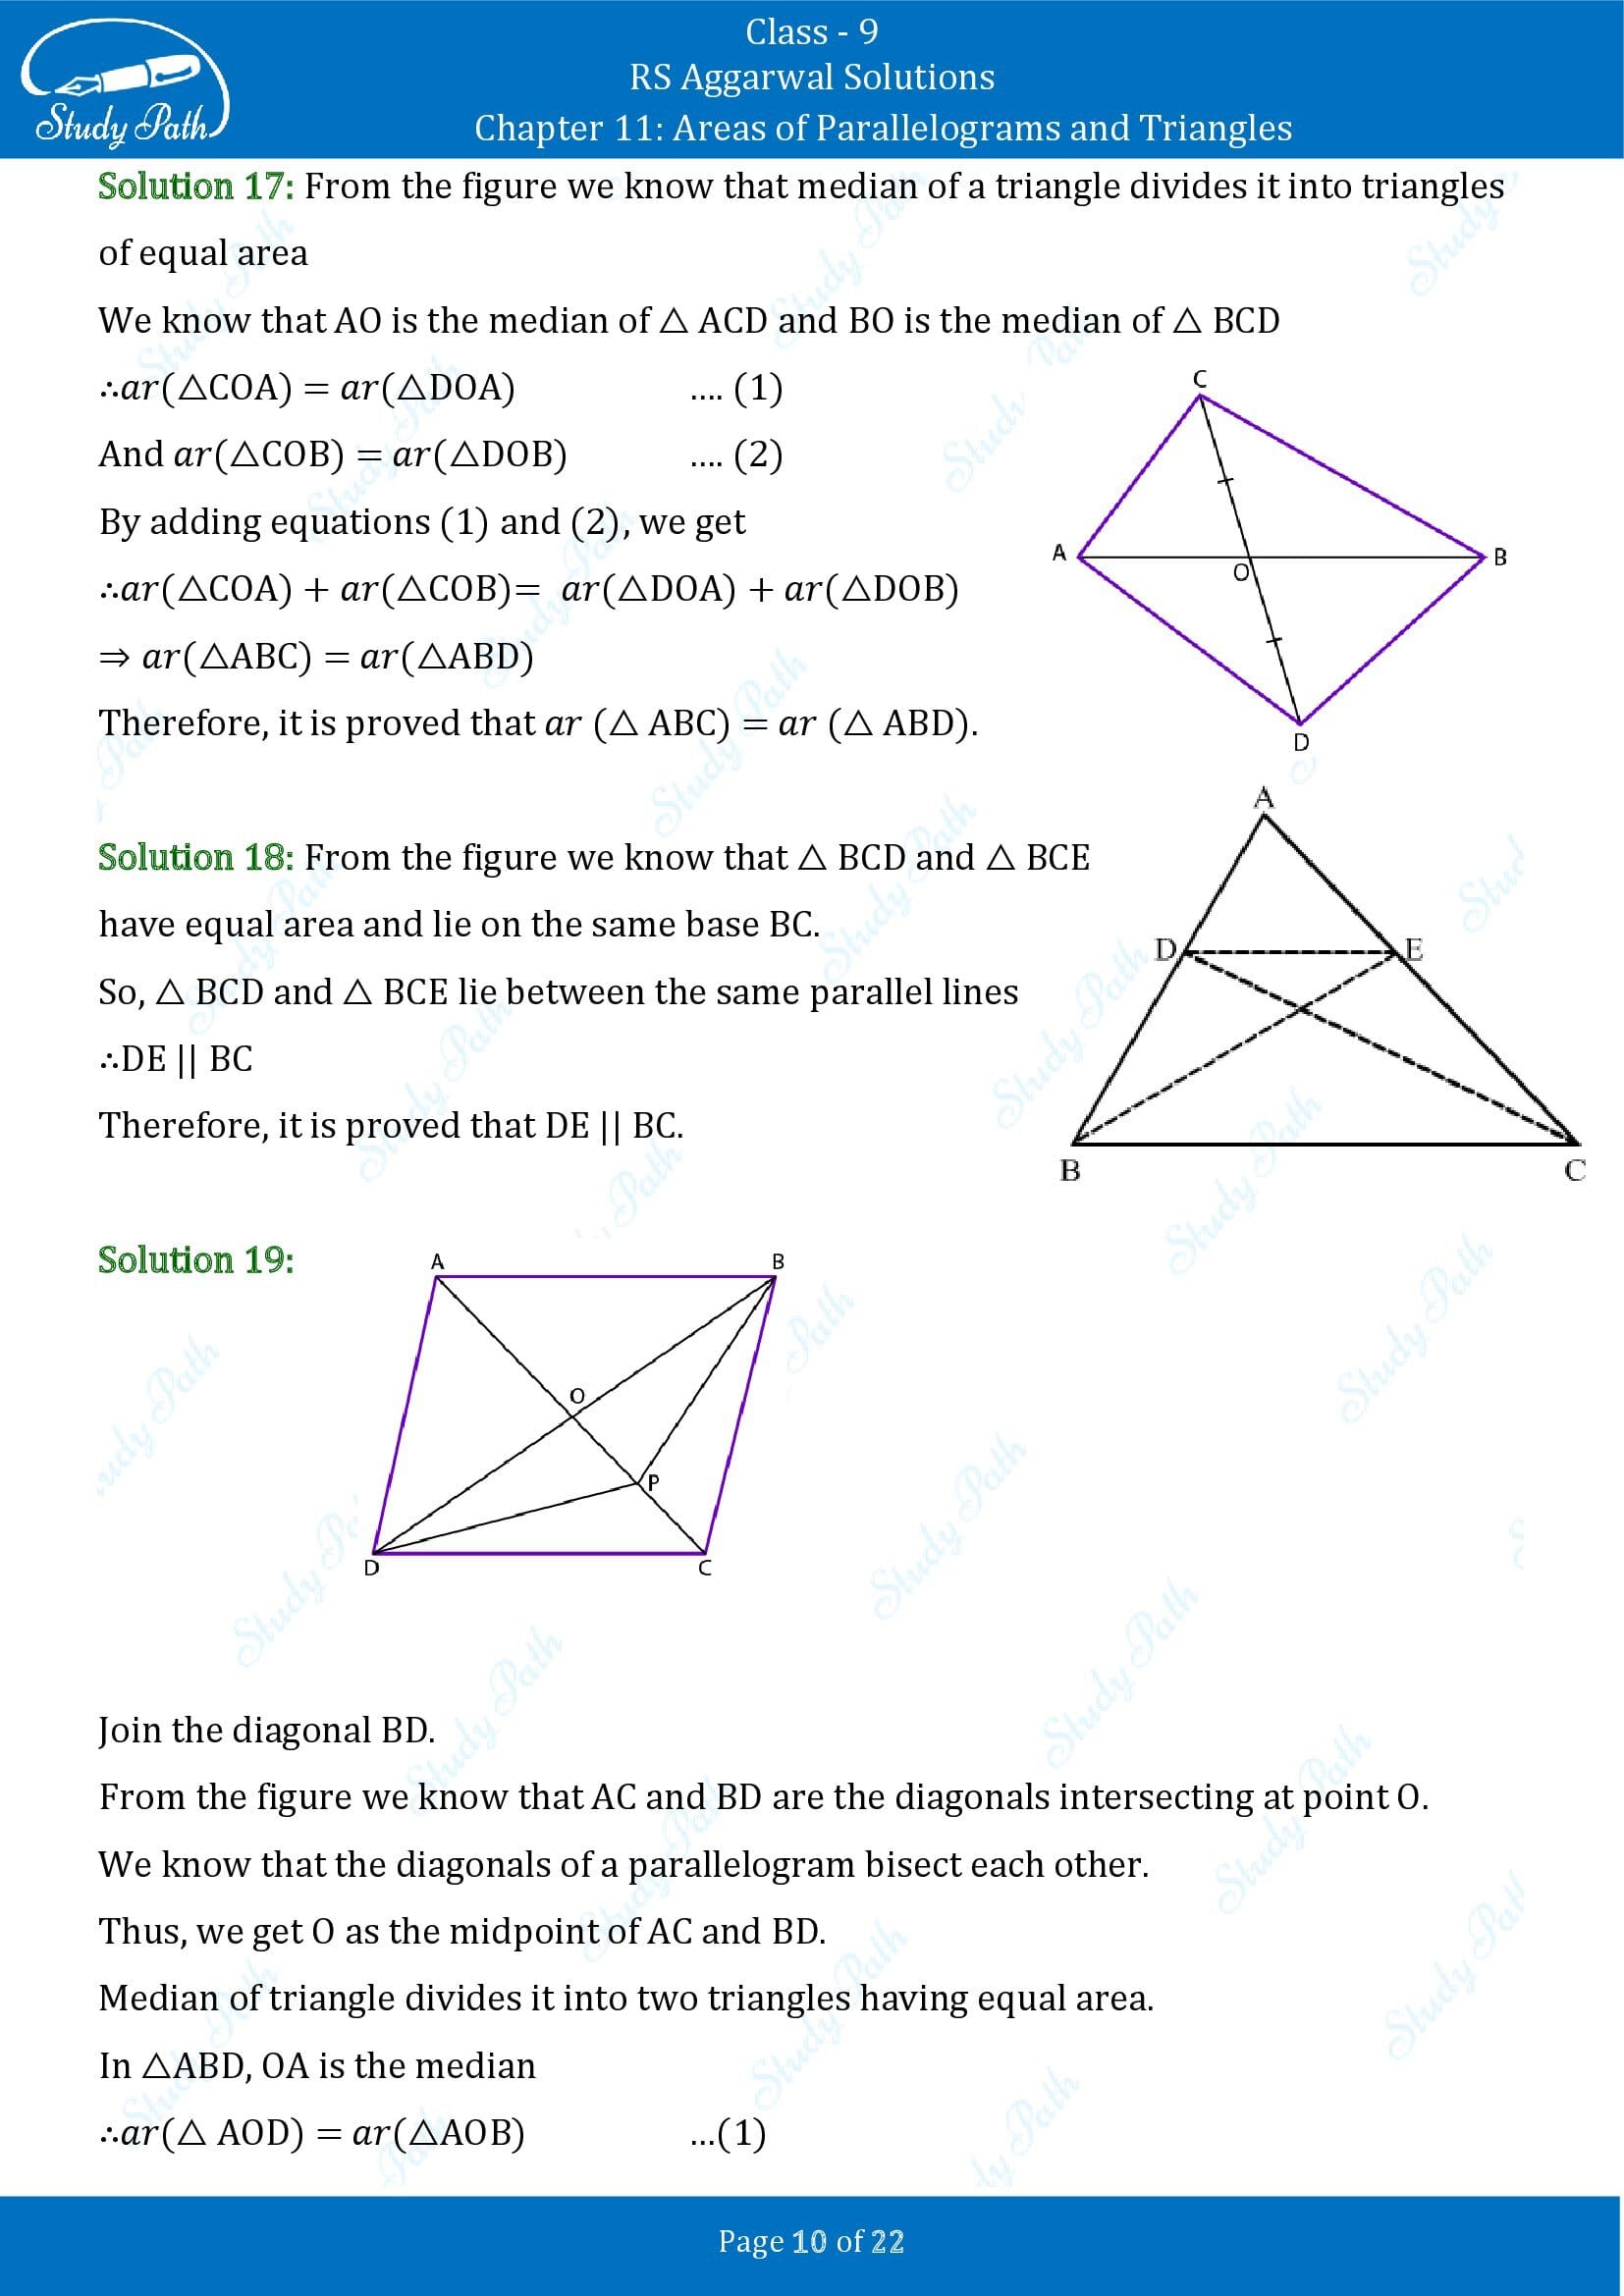 RS Aggarwal Solutions Class 9 Chapter 11 Areas of Parallelograms and Triangles Exercise 11 00010